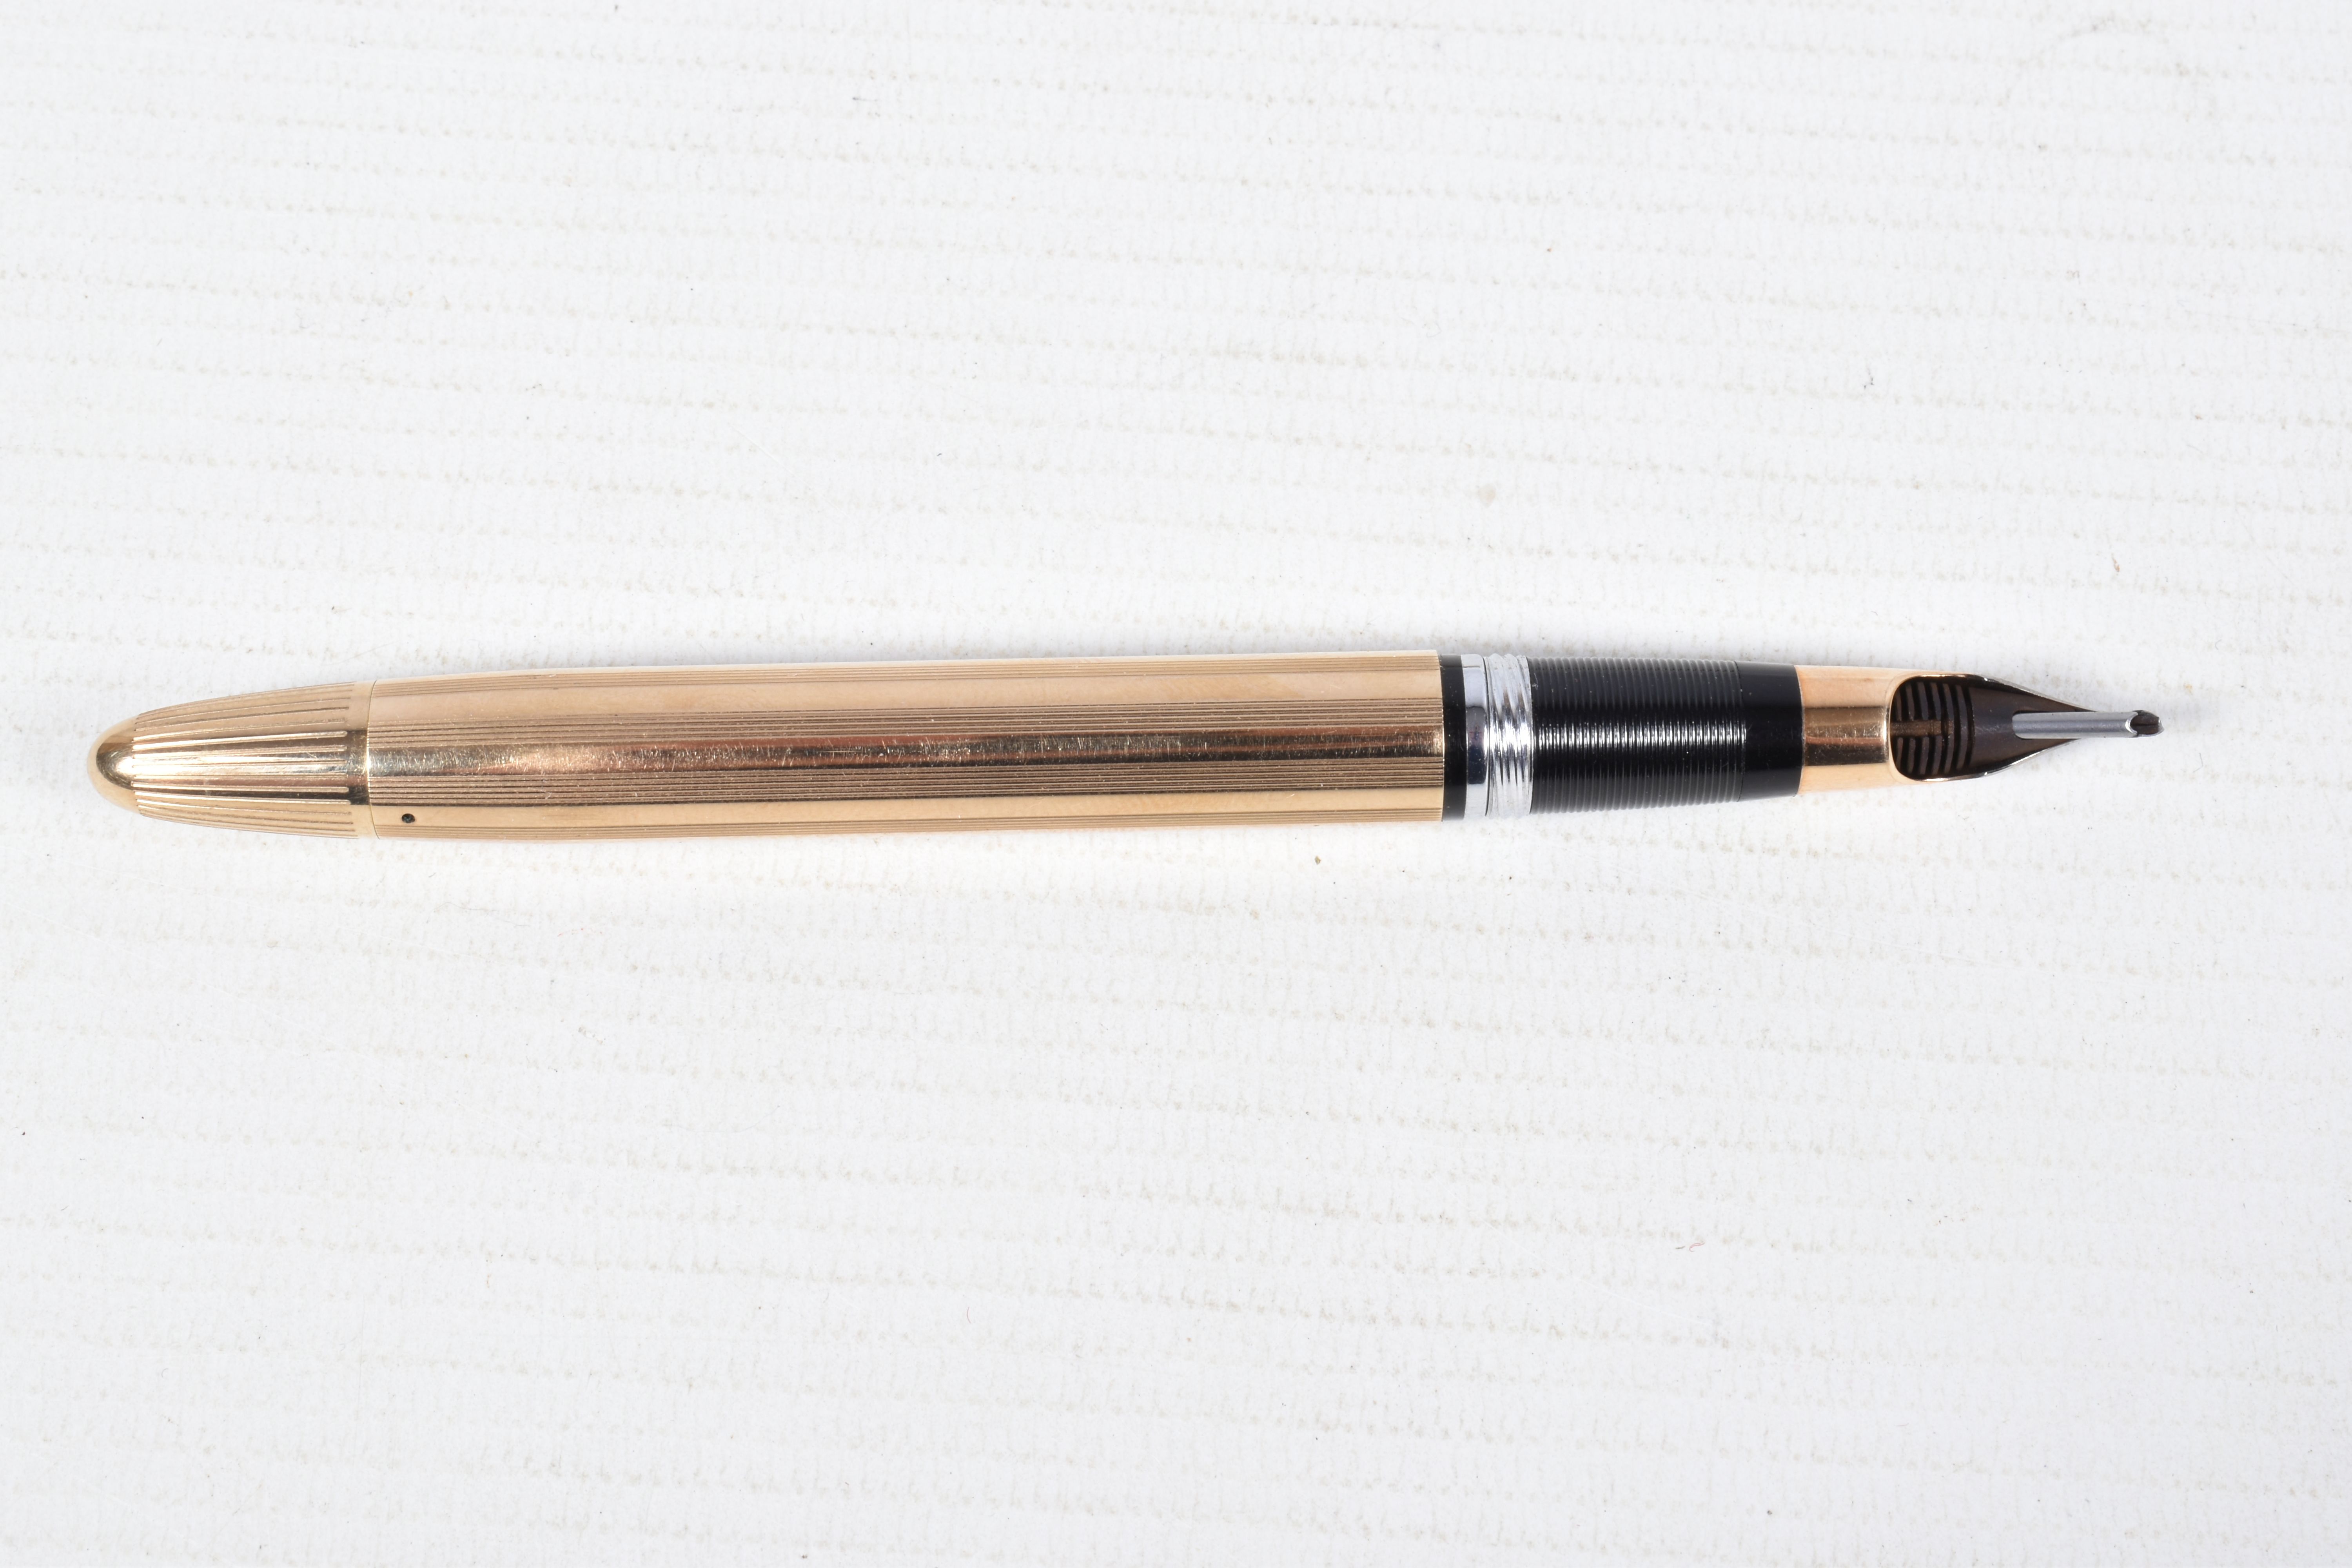 A GOLD COLOURED SHEAFFER FOUNTAIN PEN, engine turned design linear, screw on cap, with snorkel - Image 5 of 5